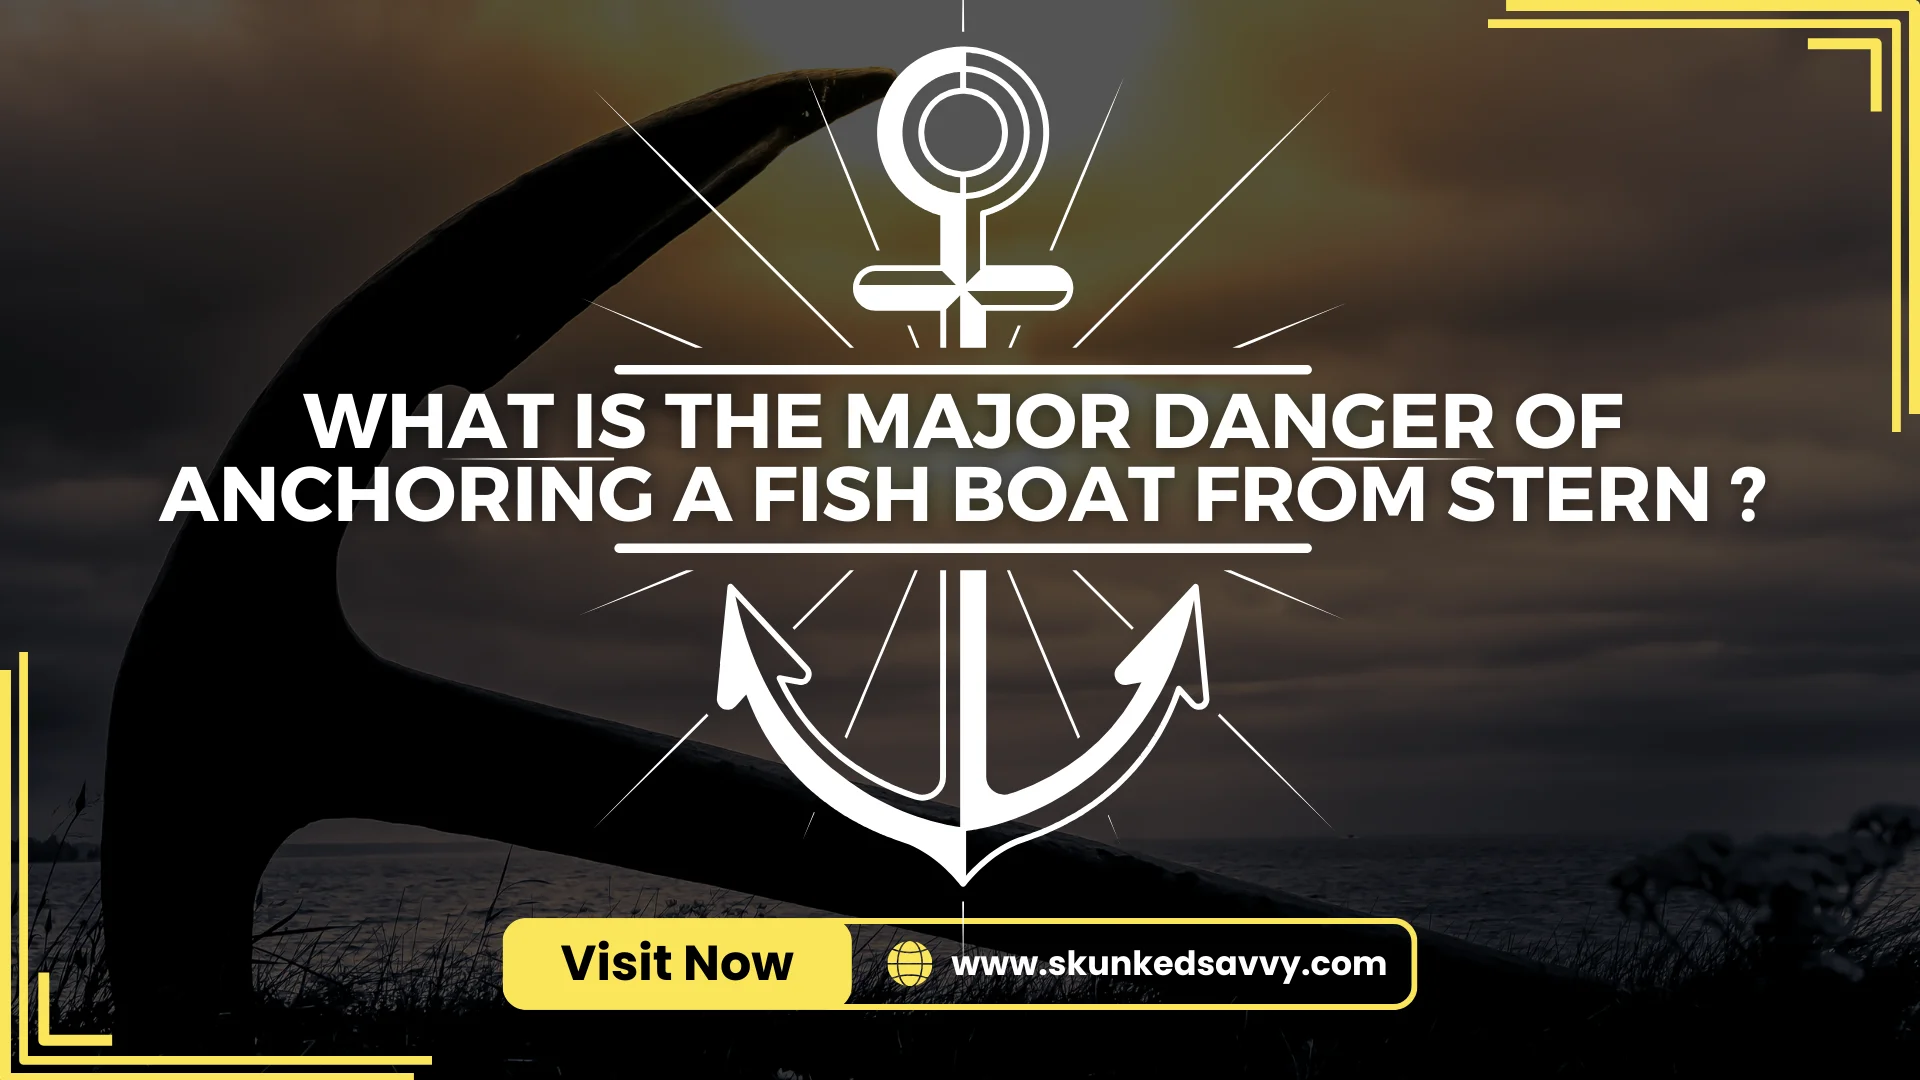 What Is The Major Danger Of Anchoring A Fish Boat From Stern